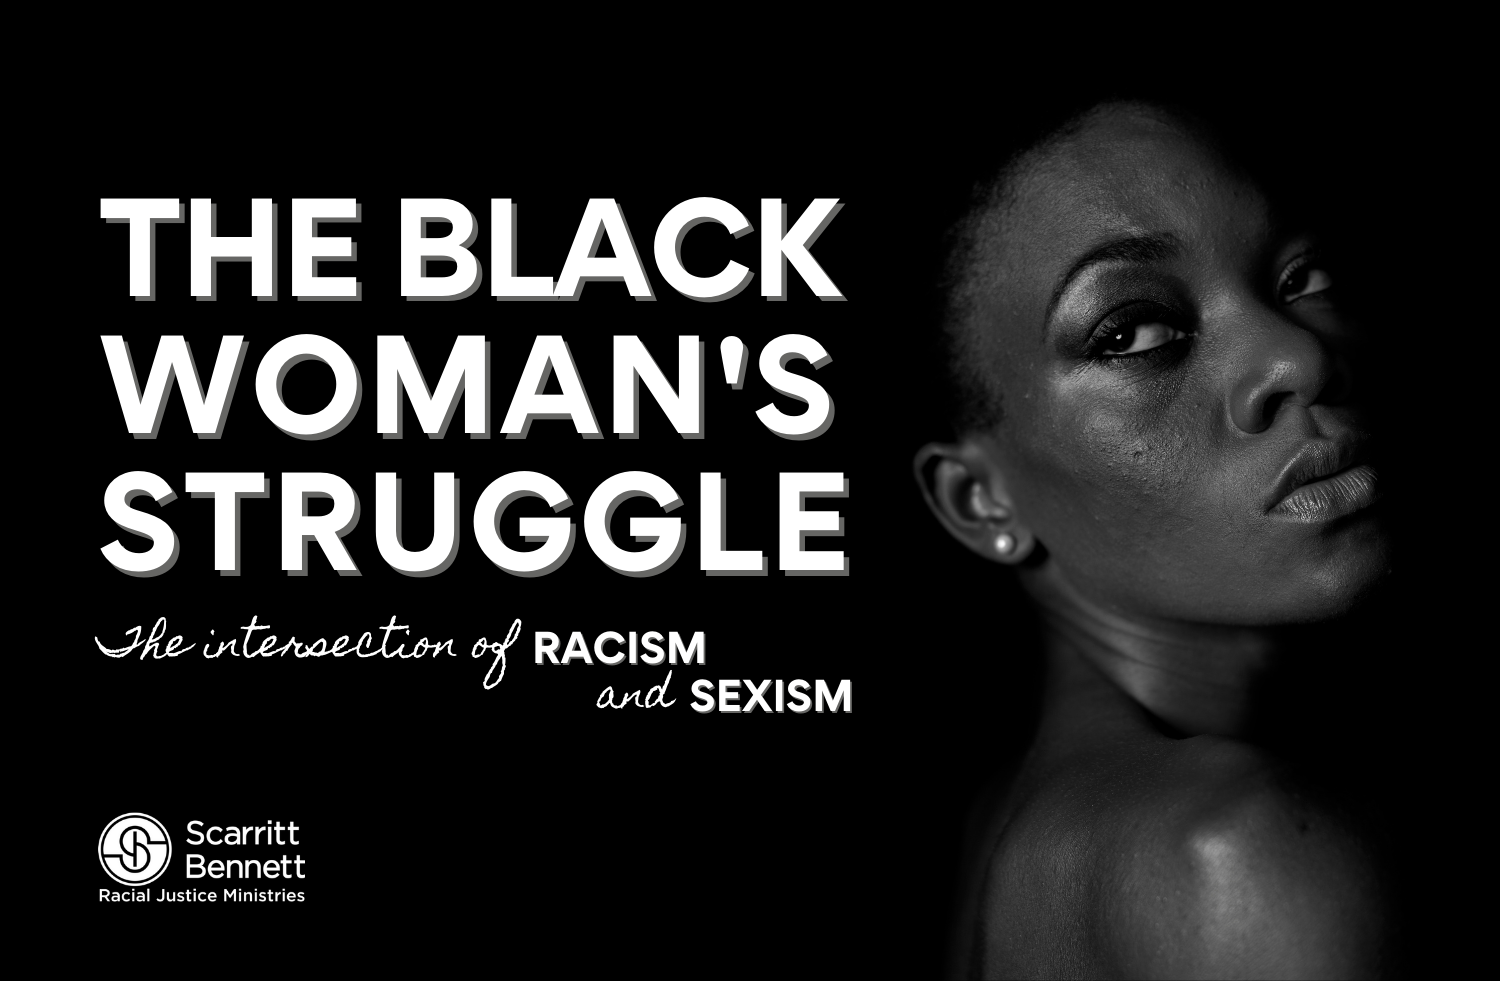 The Black Woman's Struggle: The Intersection of Racism and Sexism